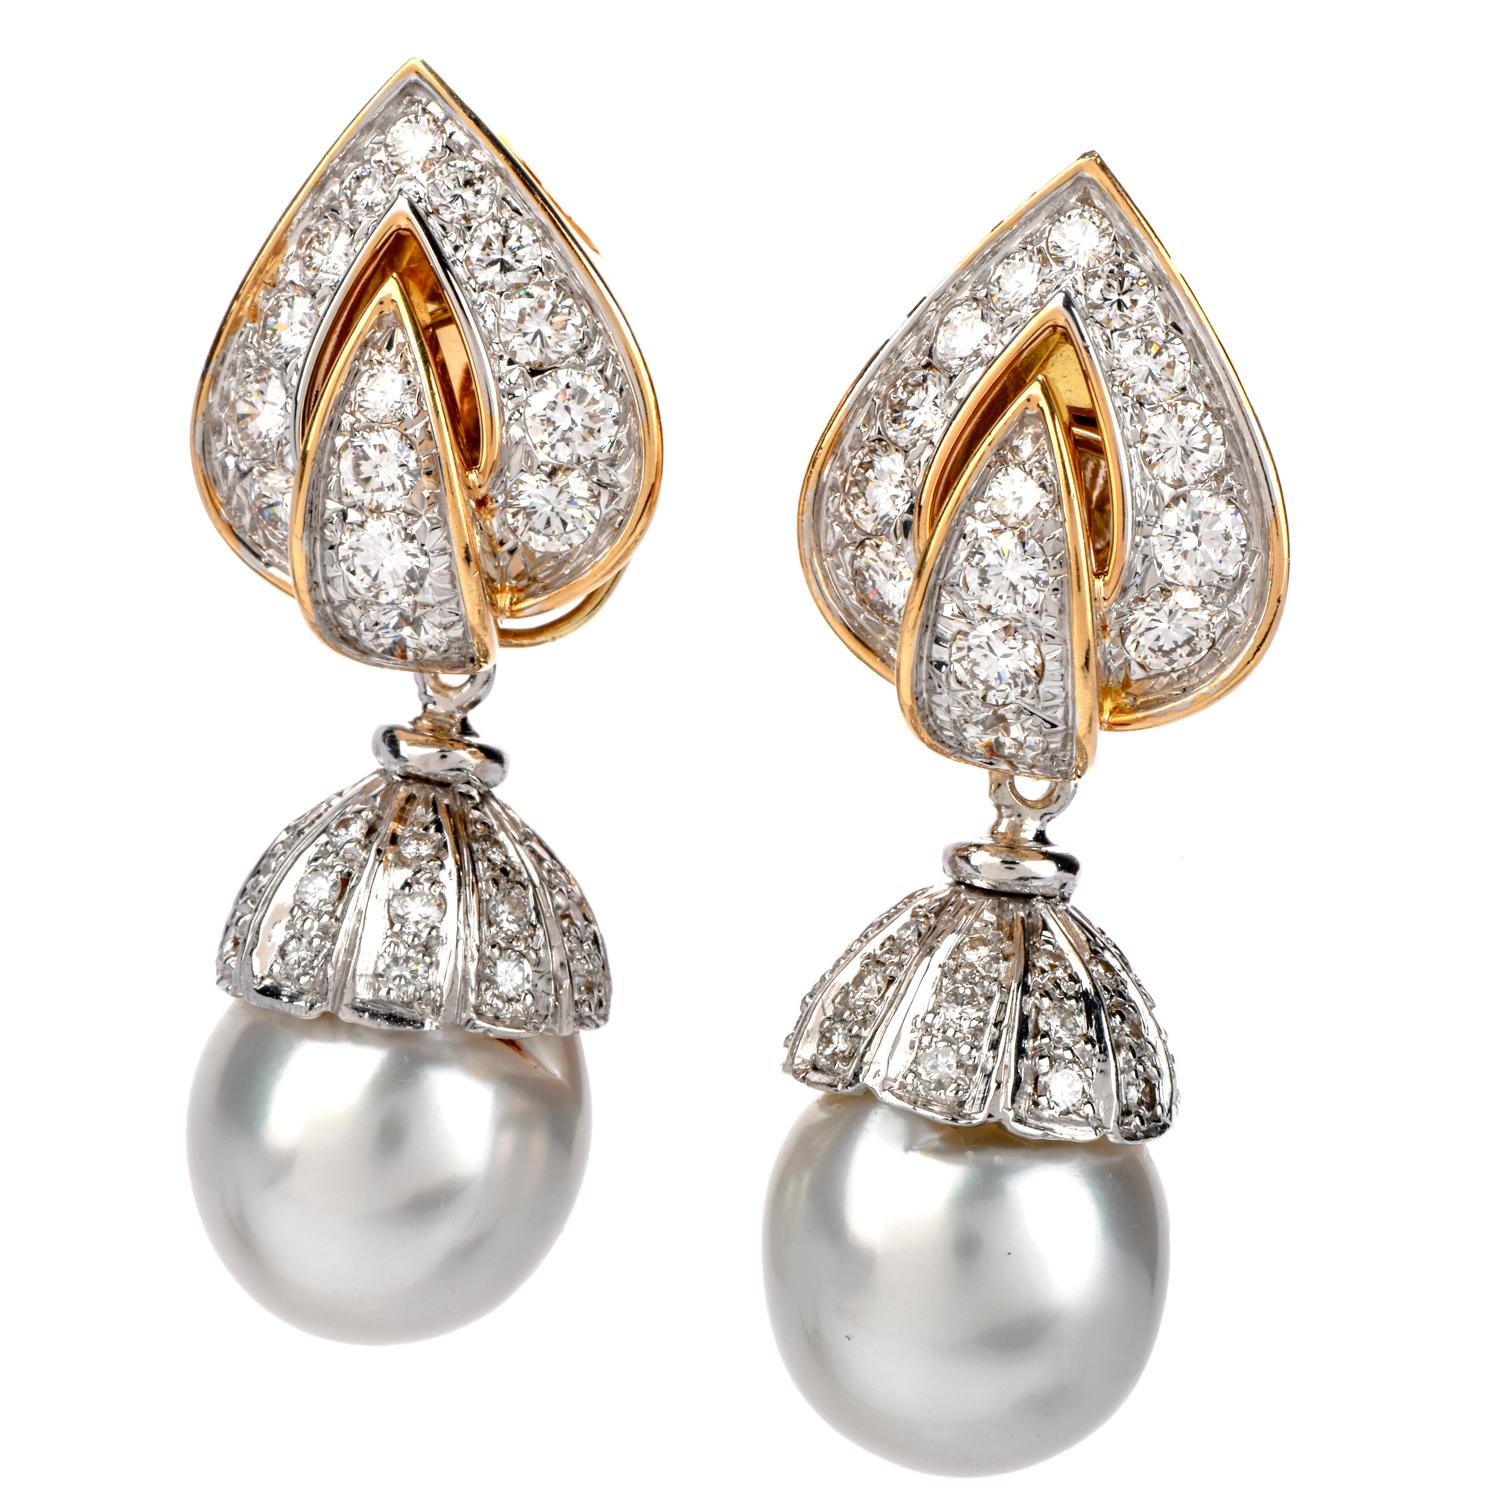 Modern Piaget Diamond Pearl 18 Karat Gold Day and Night Clip-On Earrings